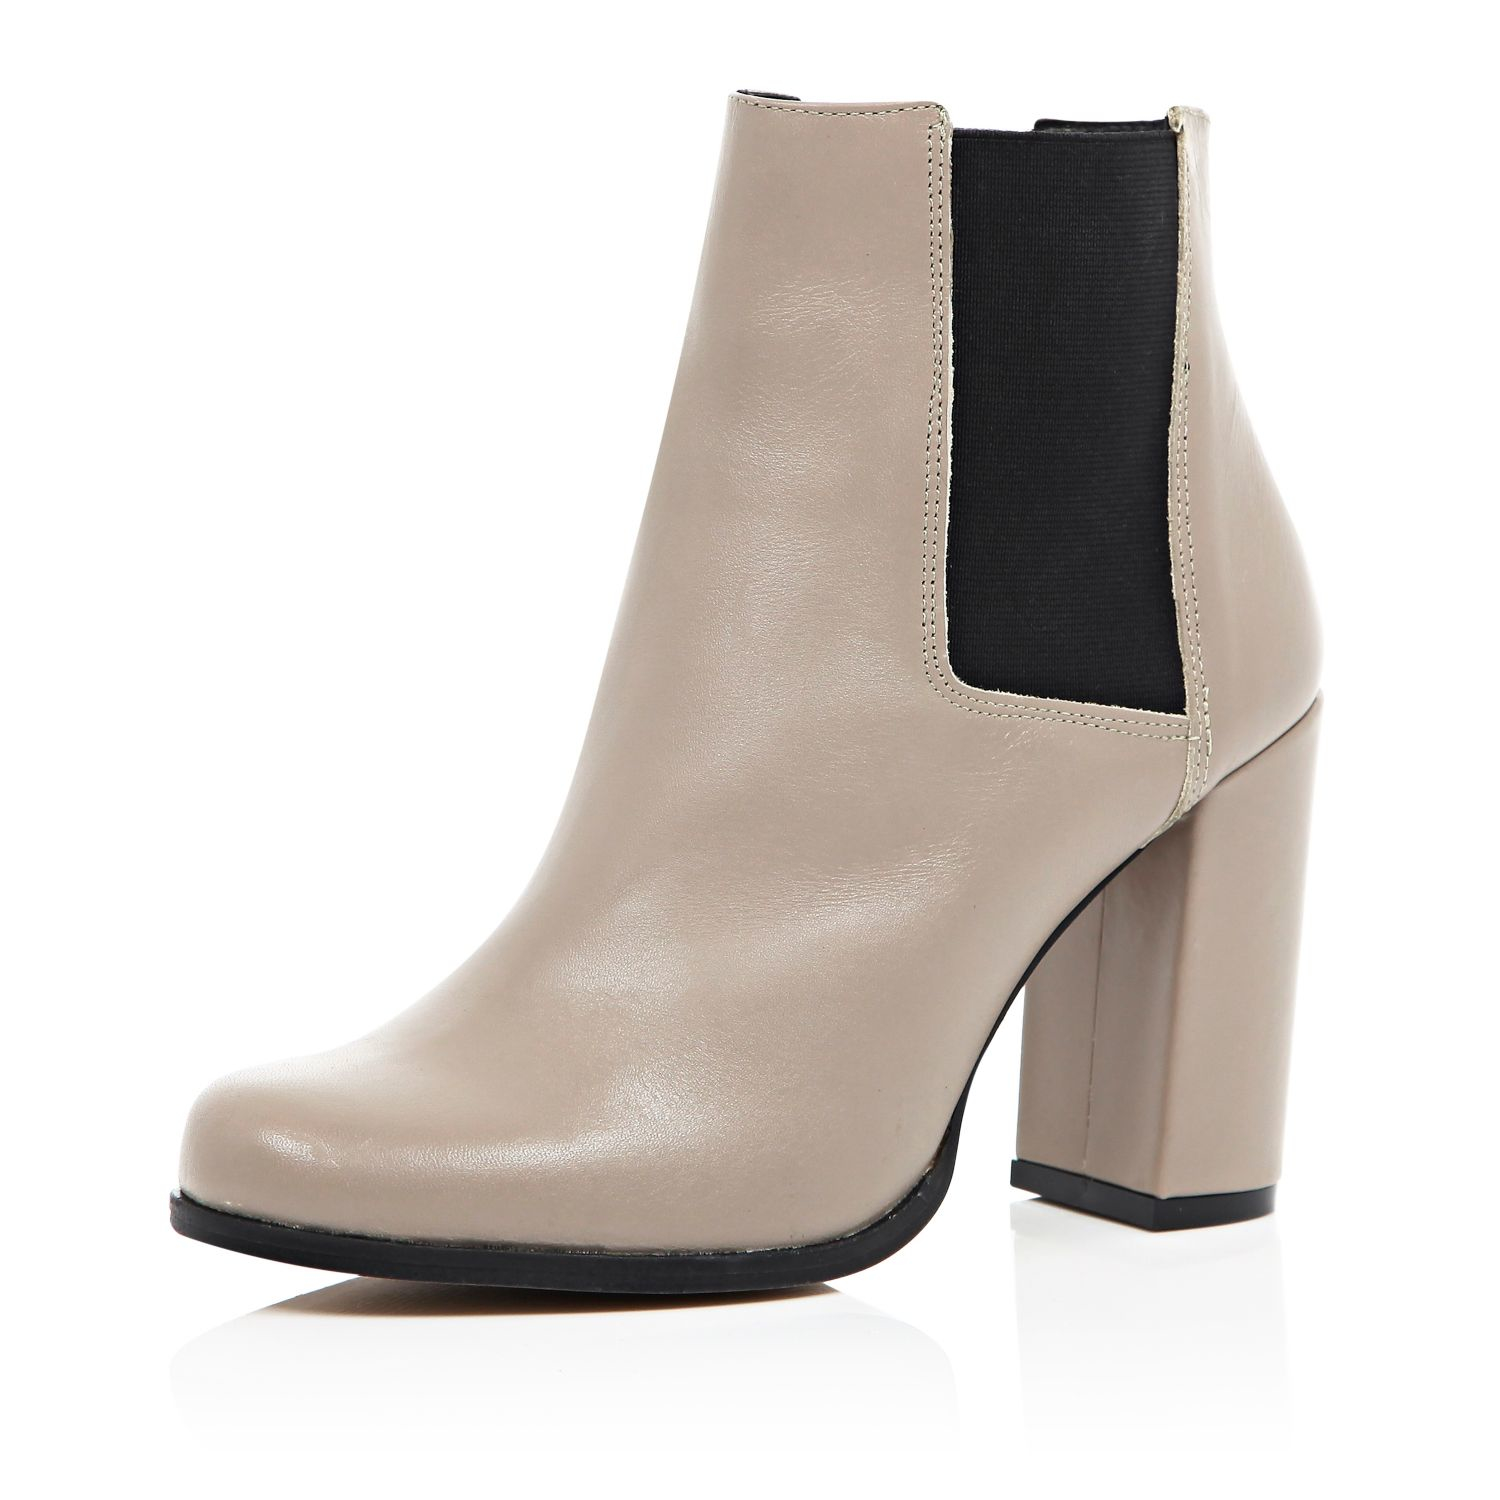 River island Beige Leather Heeled Ankle Boots in Beige (Cream) | Lyst